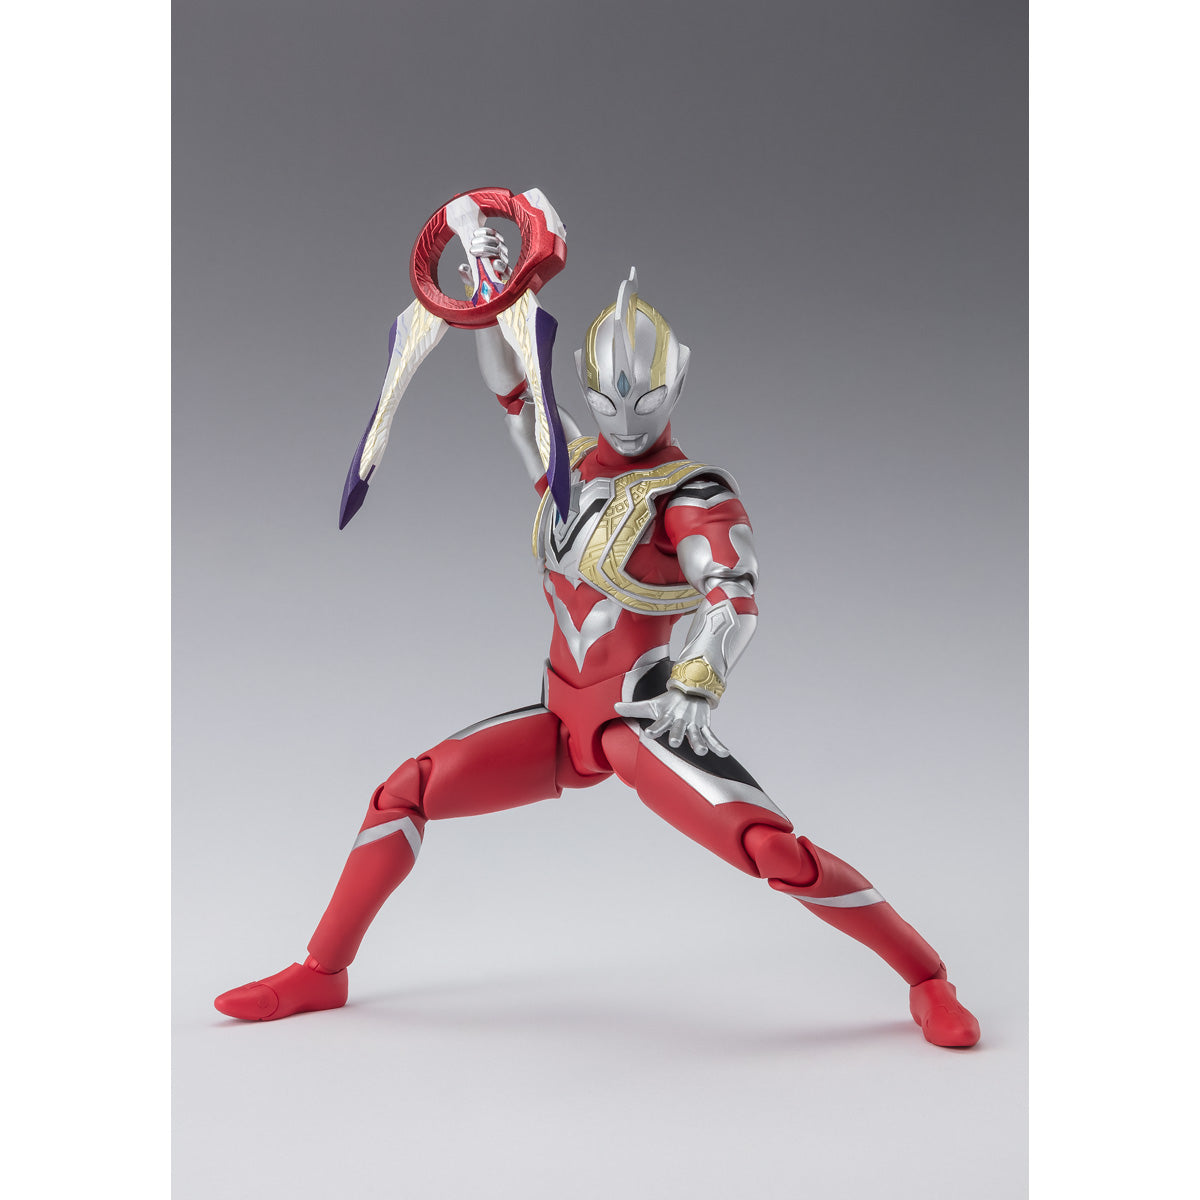 [PRE-ORDER] S.H.Figuarts ULTRAMAN TRIGGER POWER TYPE